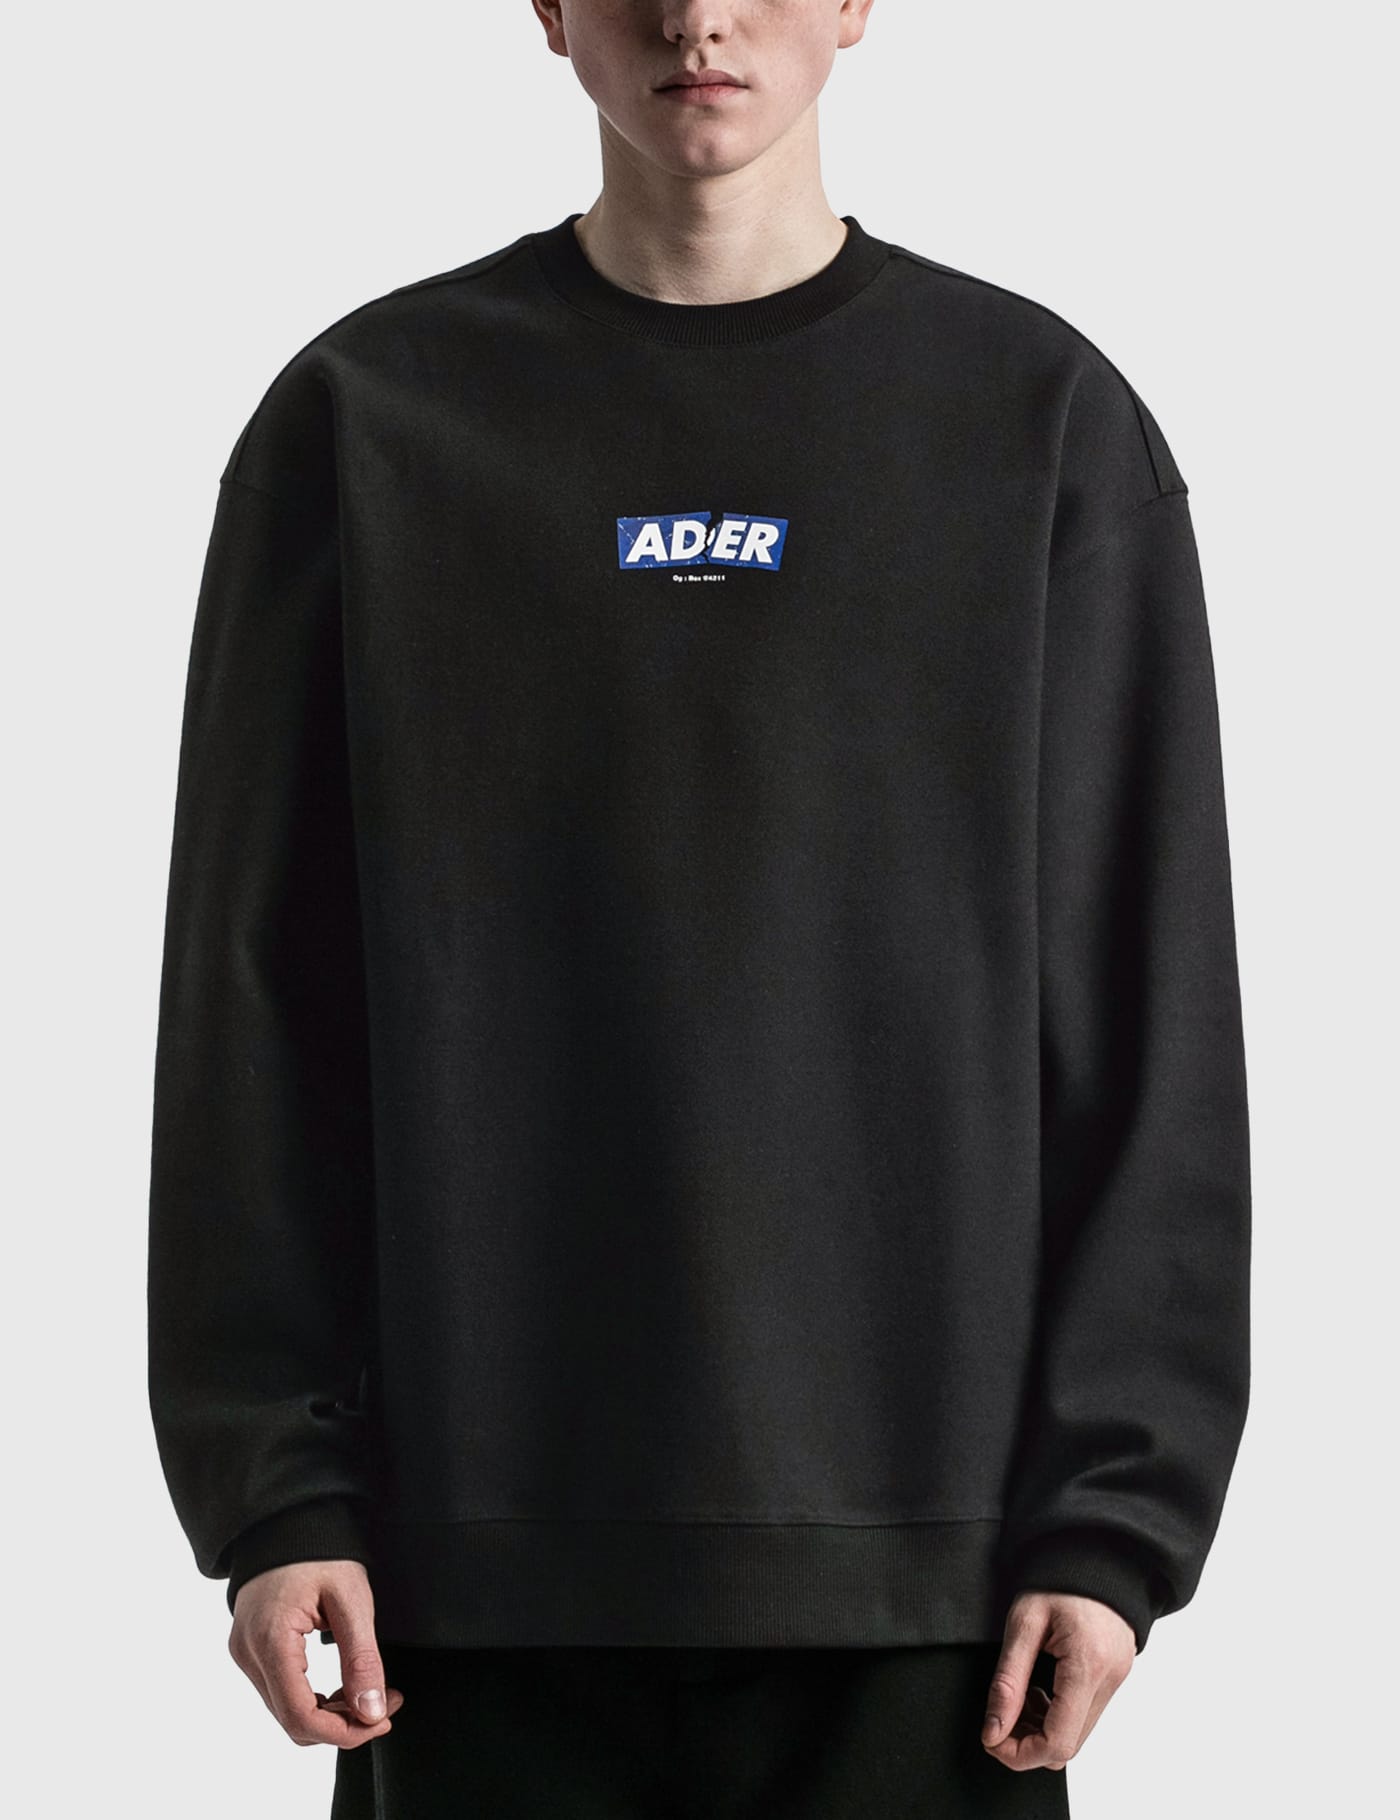 Ader Error | HBX - Globally Curated Fashion and Lifestyle by Hypebeast